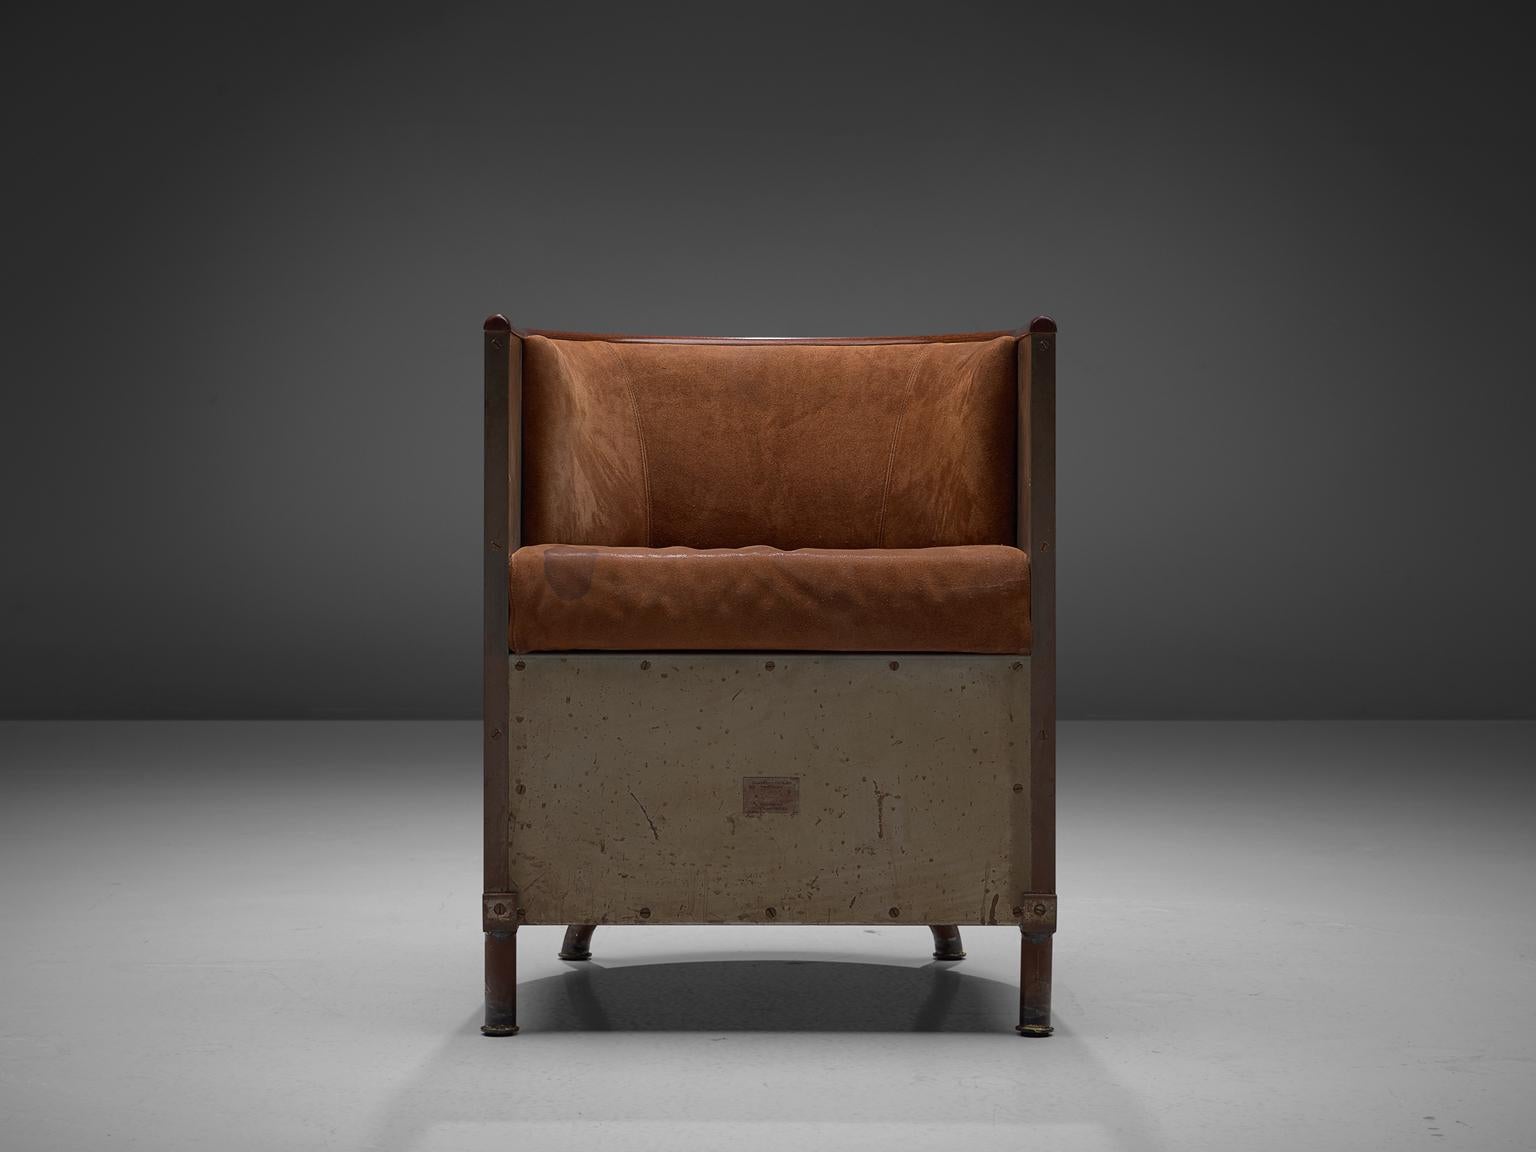 Mats Theselius for Källemo, Järn/Mocca Fätöljen chair edition 05/360, cognac suede, wood and steel, Sweden, 1994.

This chair is named the Jarn/Mocca chair, which means iron / mocca, referring to the material and colors in this design. The chairs